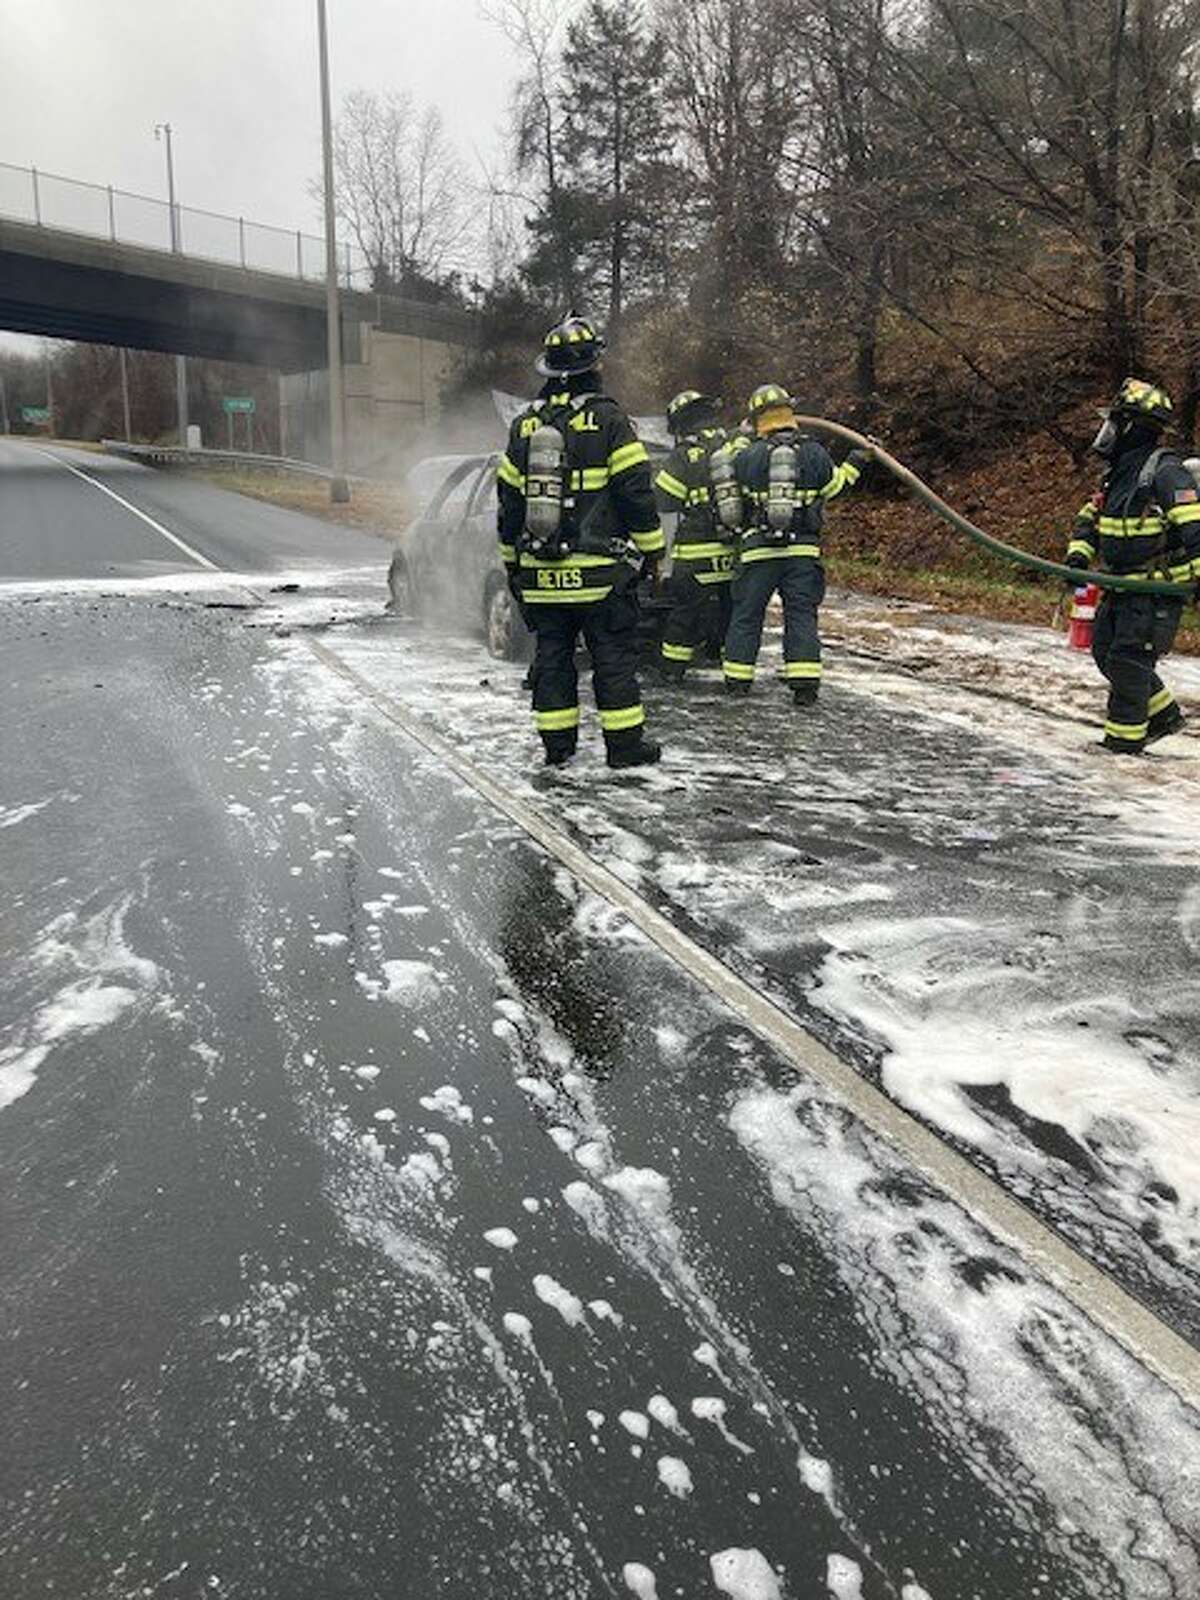 Firefighters closed two travel lanes on I-91 southbound Wednesday morning as they worked to extinguish a car fire that destroyed a Ford SUV, according to Rocky Hill Fire Chief Michael P. Garrahy.